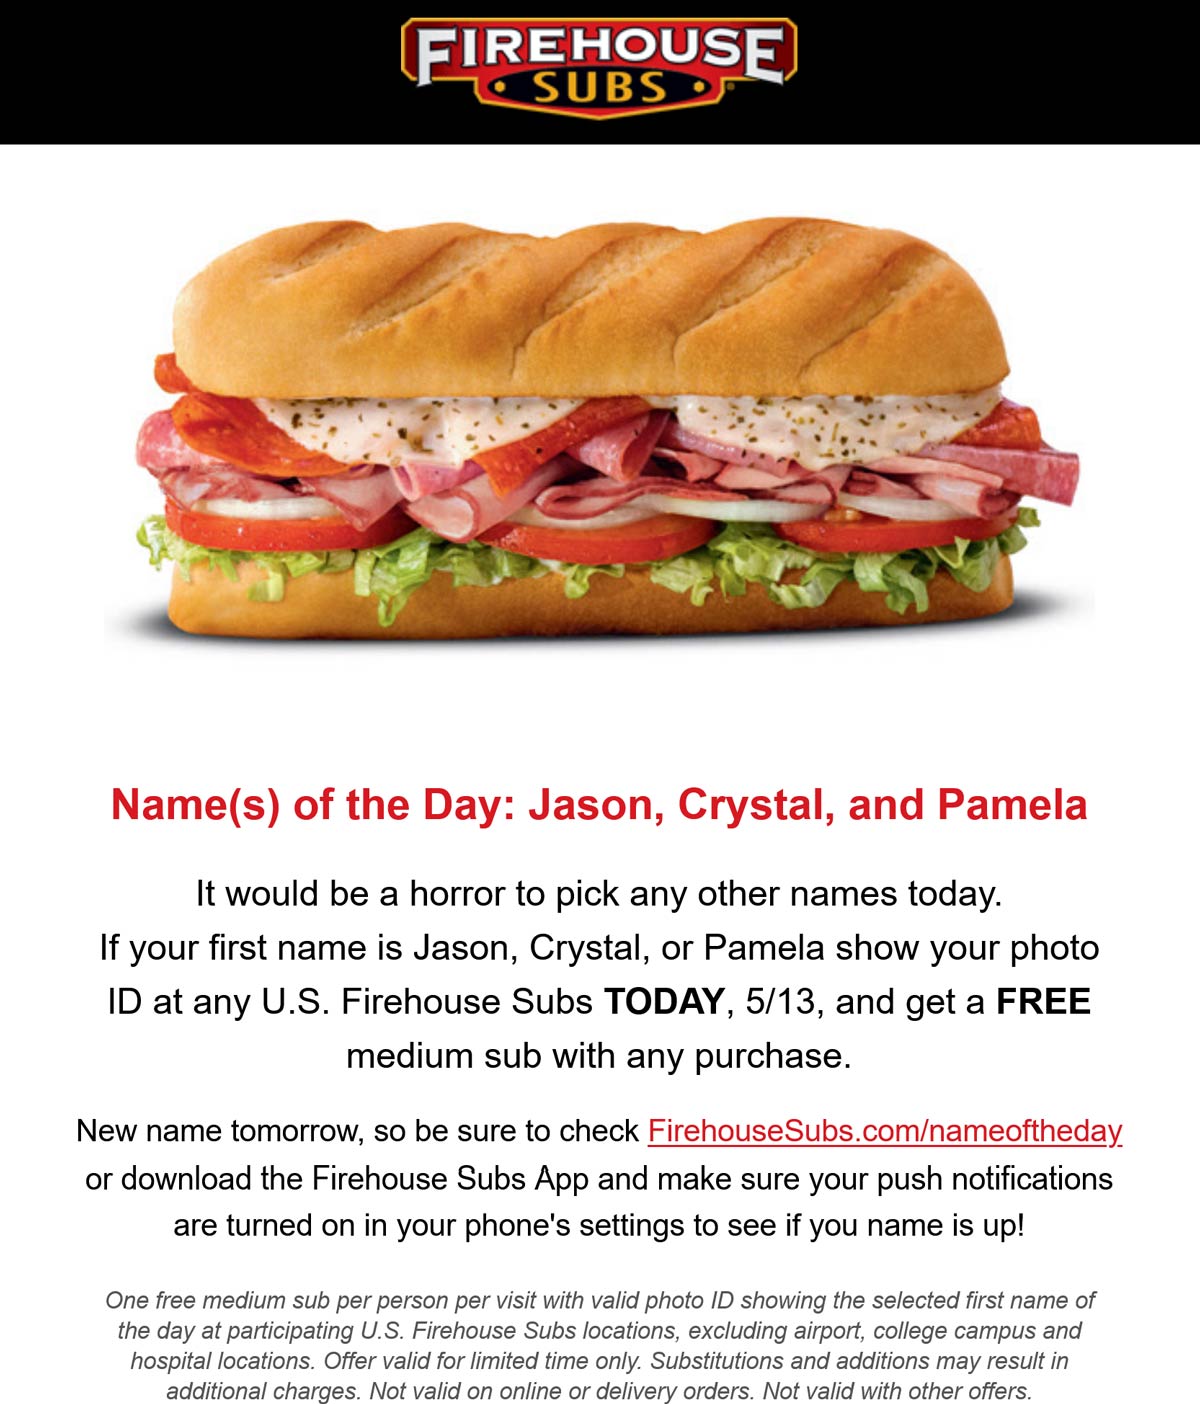 Firehouse Subs restaurants Coupon  Jason, Crystal, and Pamela enjoy a free sub sandwich today at Firehouse Subs #firehousesubs 